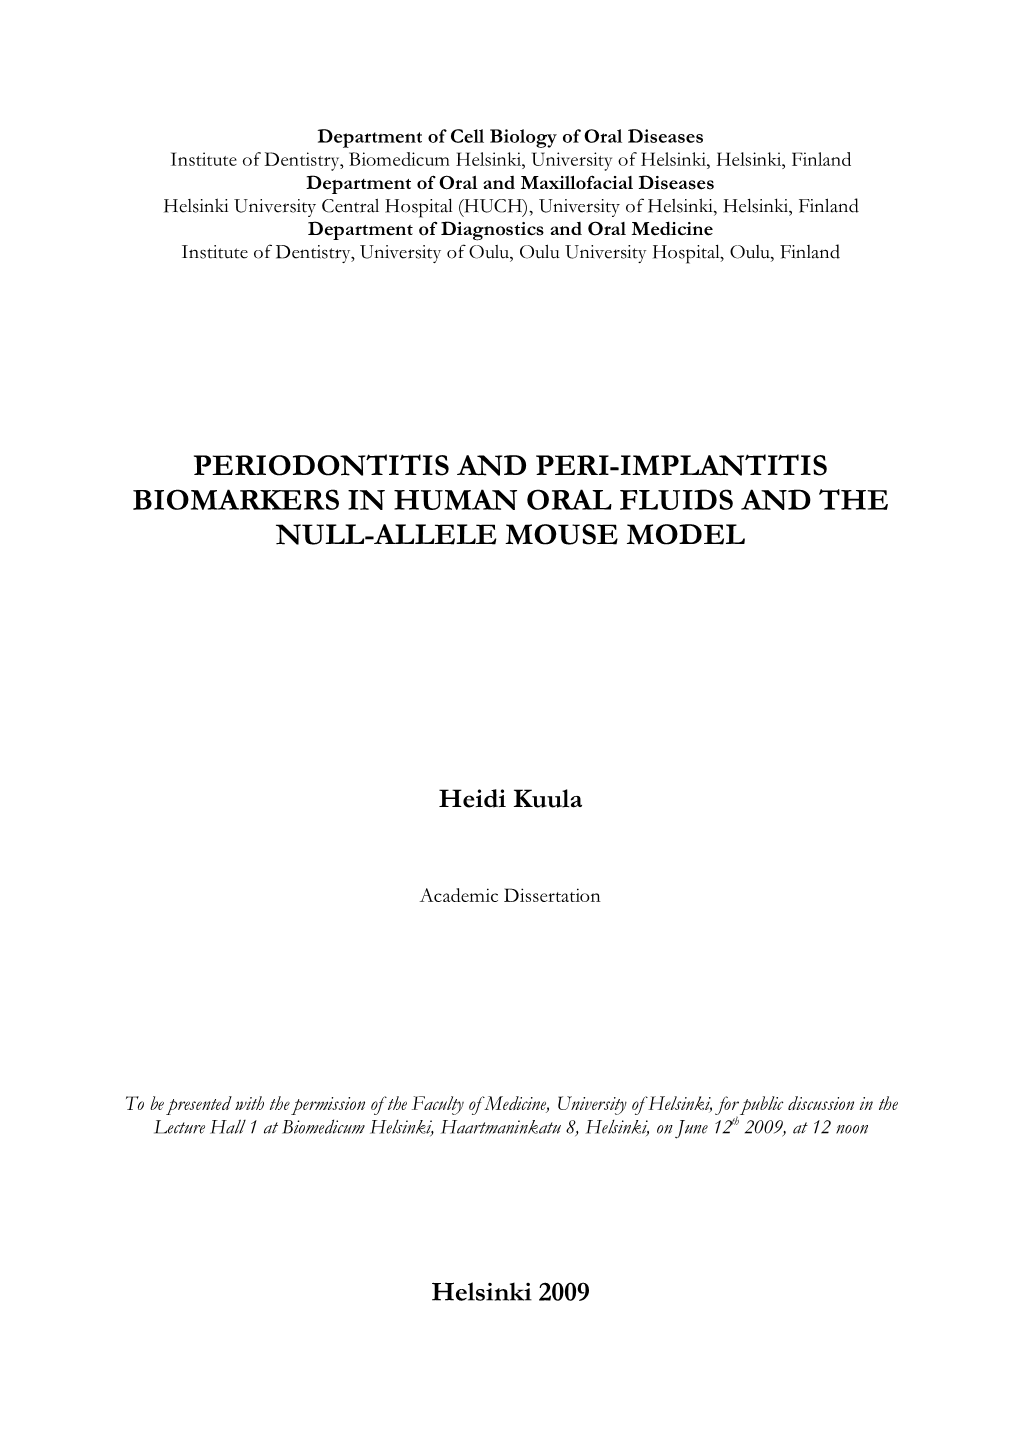 Periodontitis and Peri-Implantitis Biomarkers in Human Oral Fluids and the Null-Allele Mouse Model